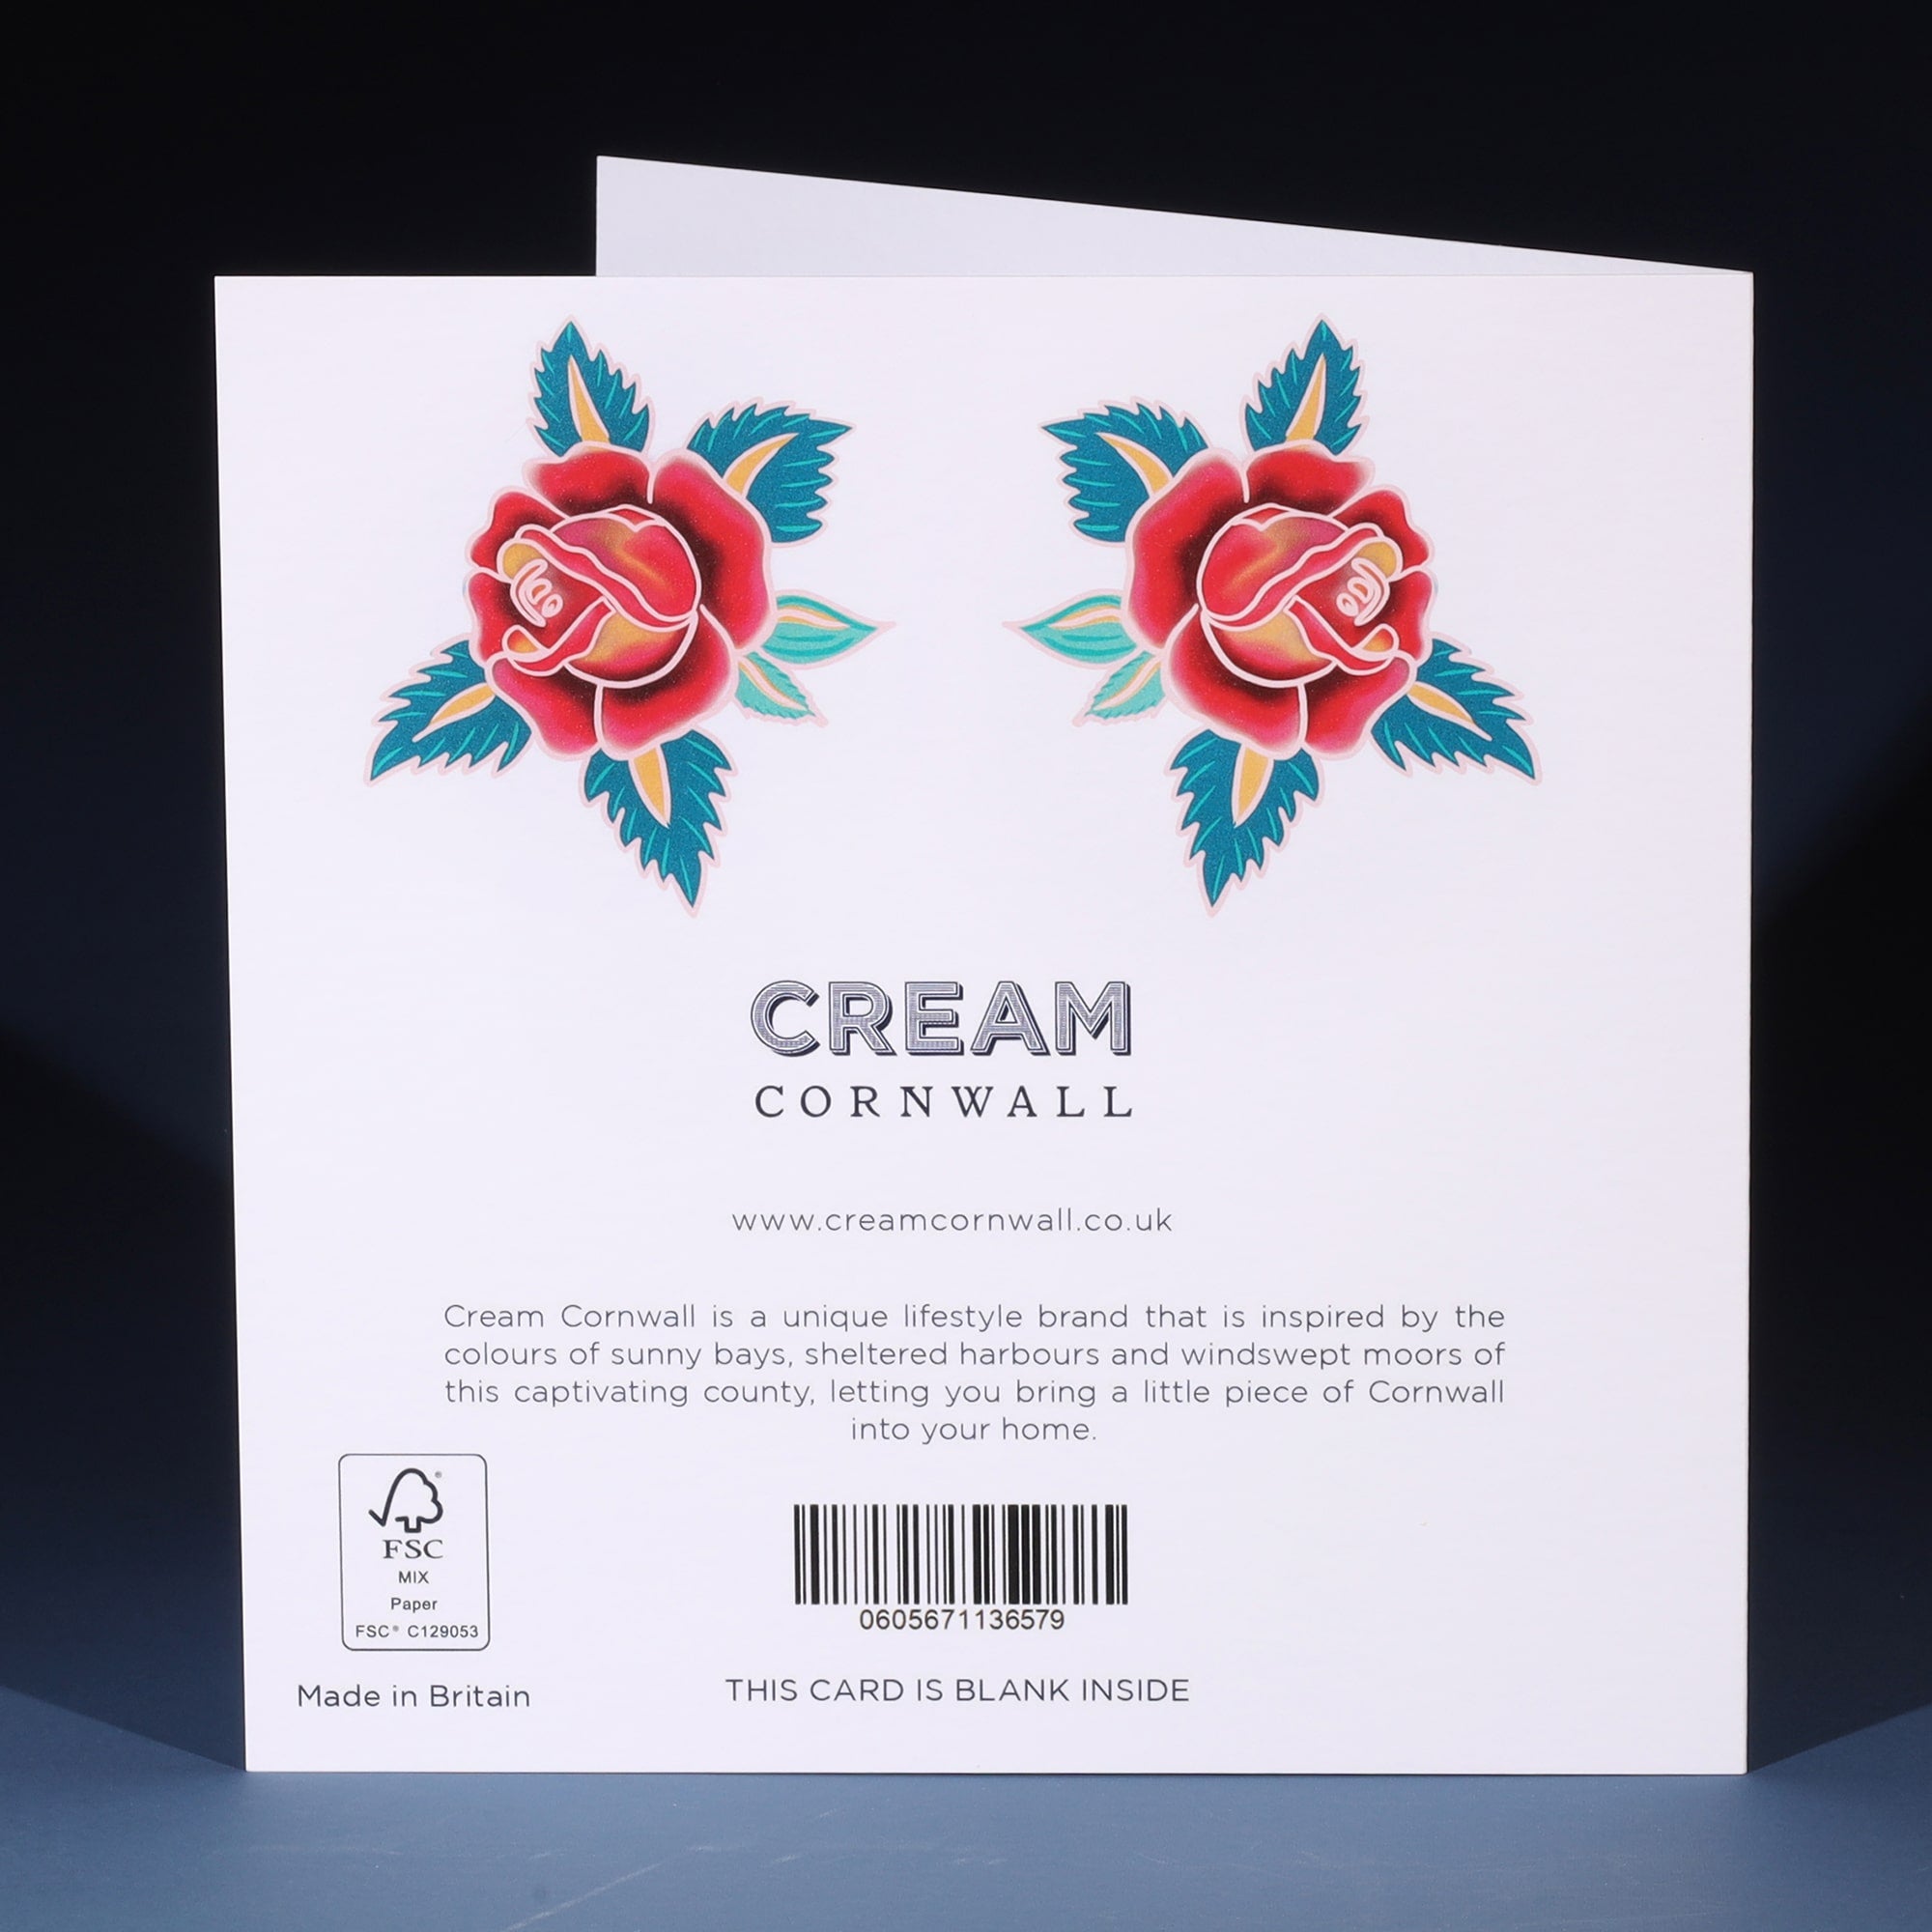 Back of greeting card with details about Cream Cornwall and 2 tattoo inspired rose illustrations.